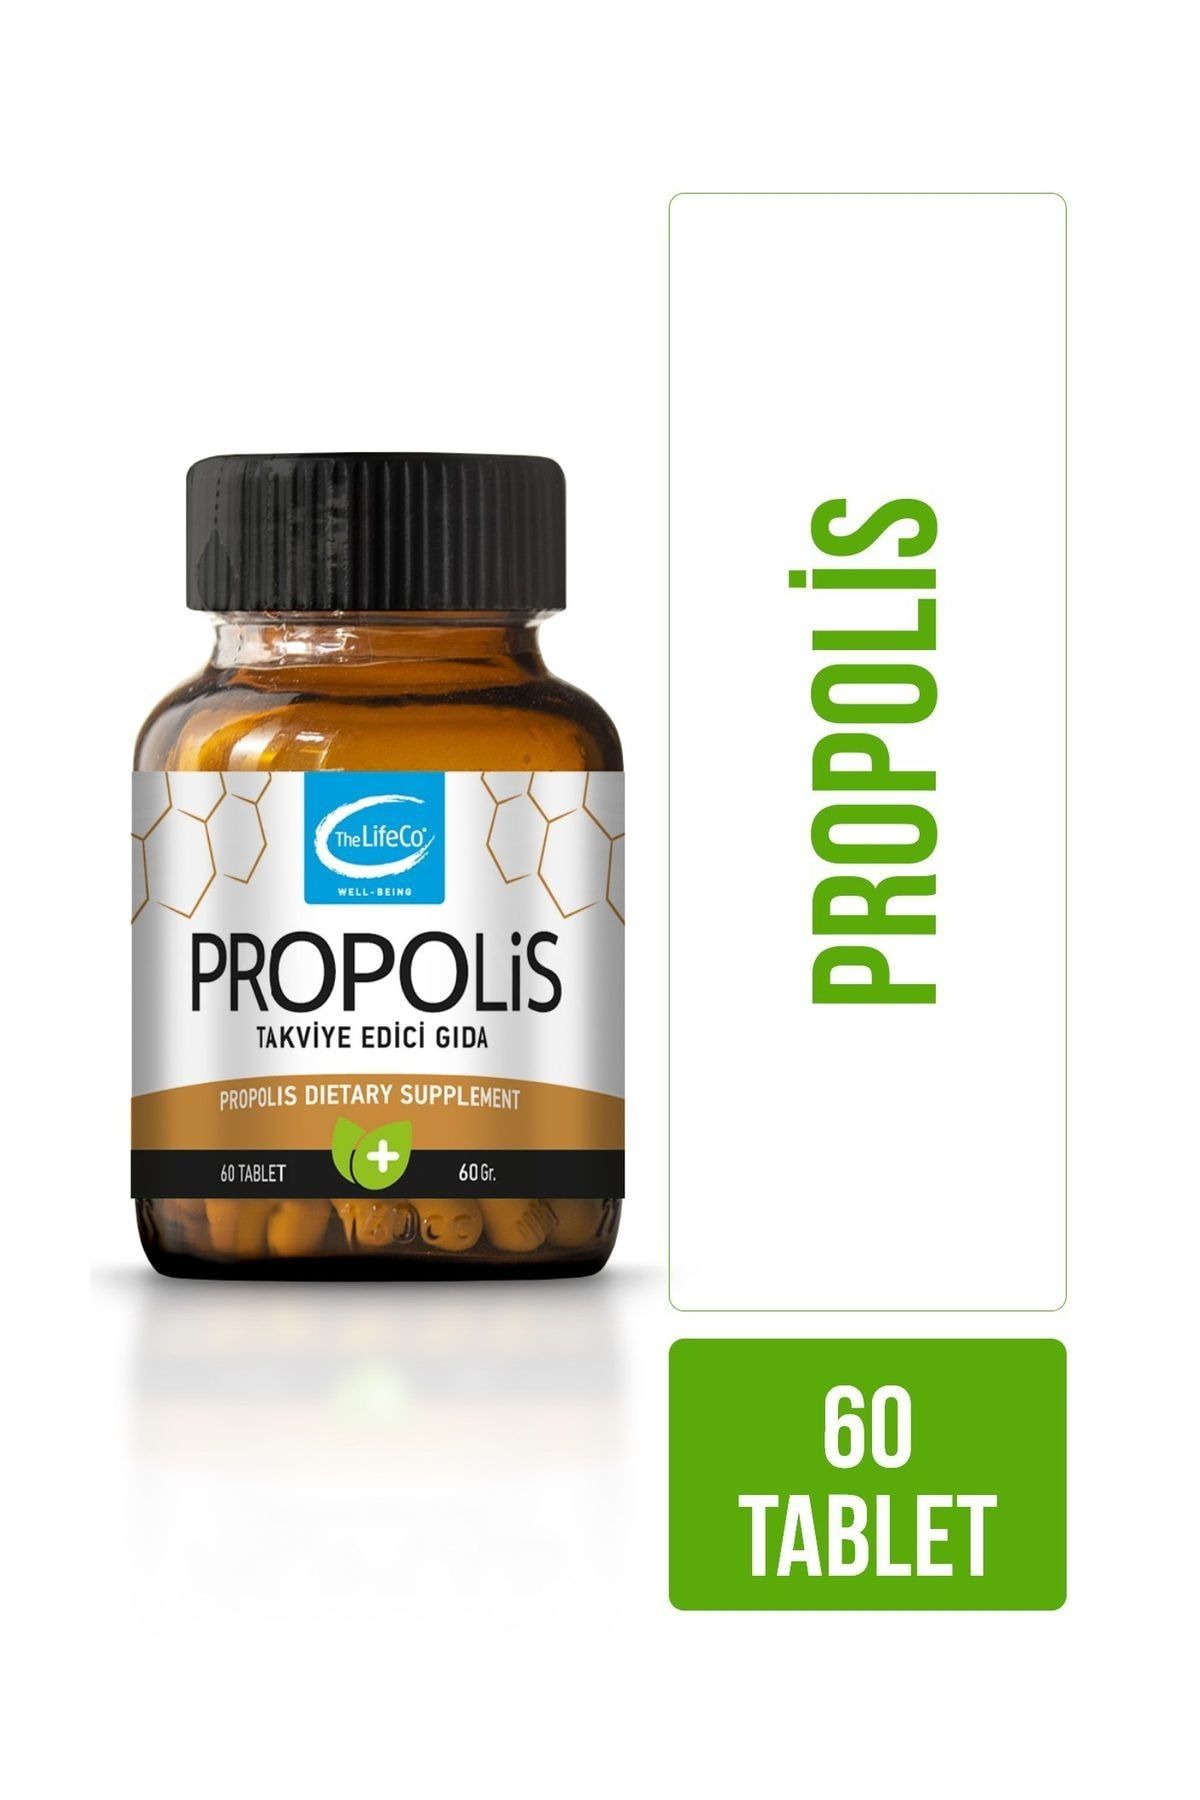 TheLifeCo Propolis 60 Tablet